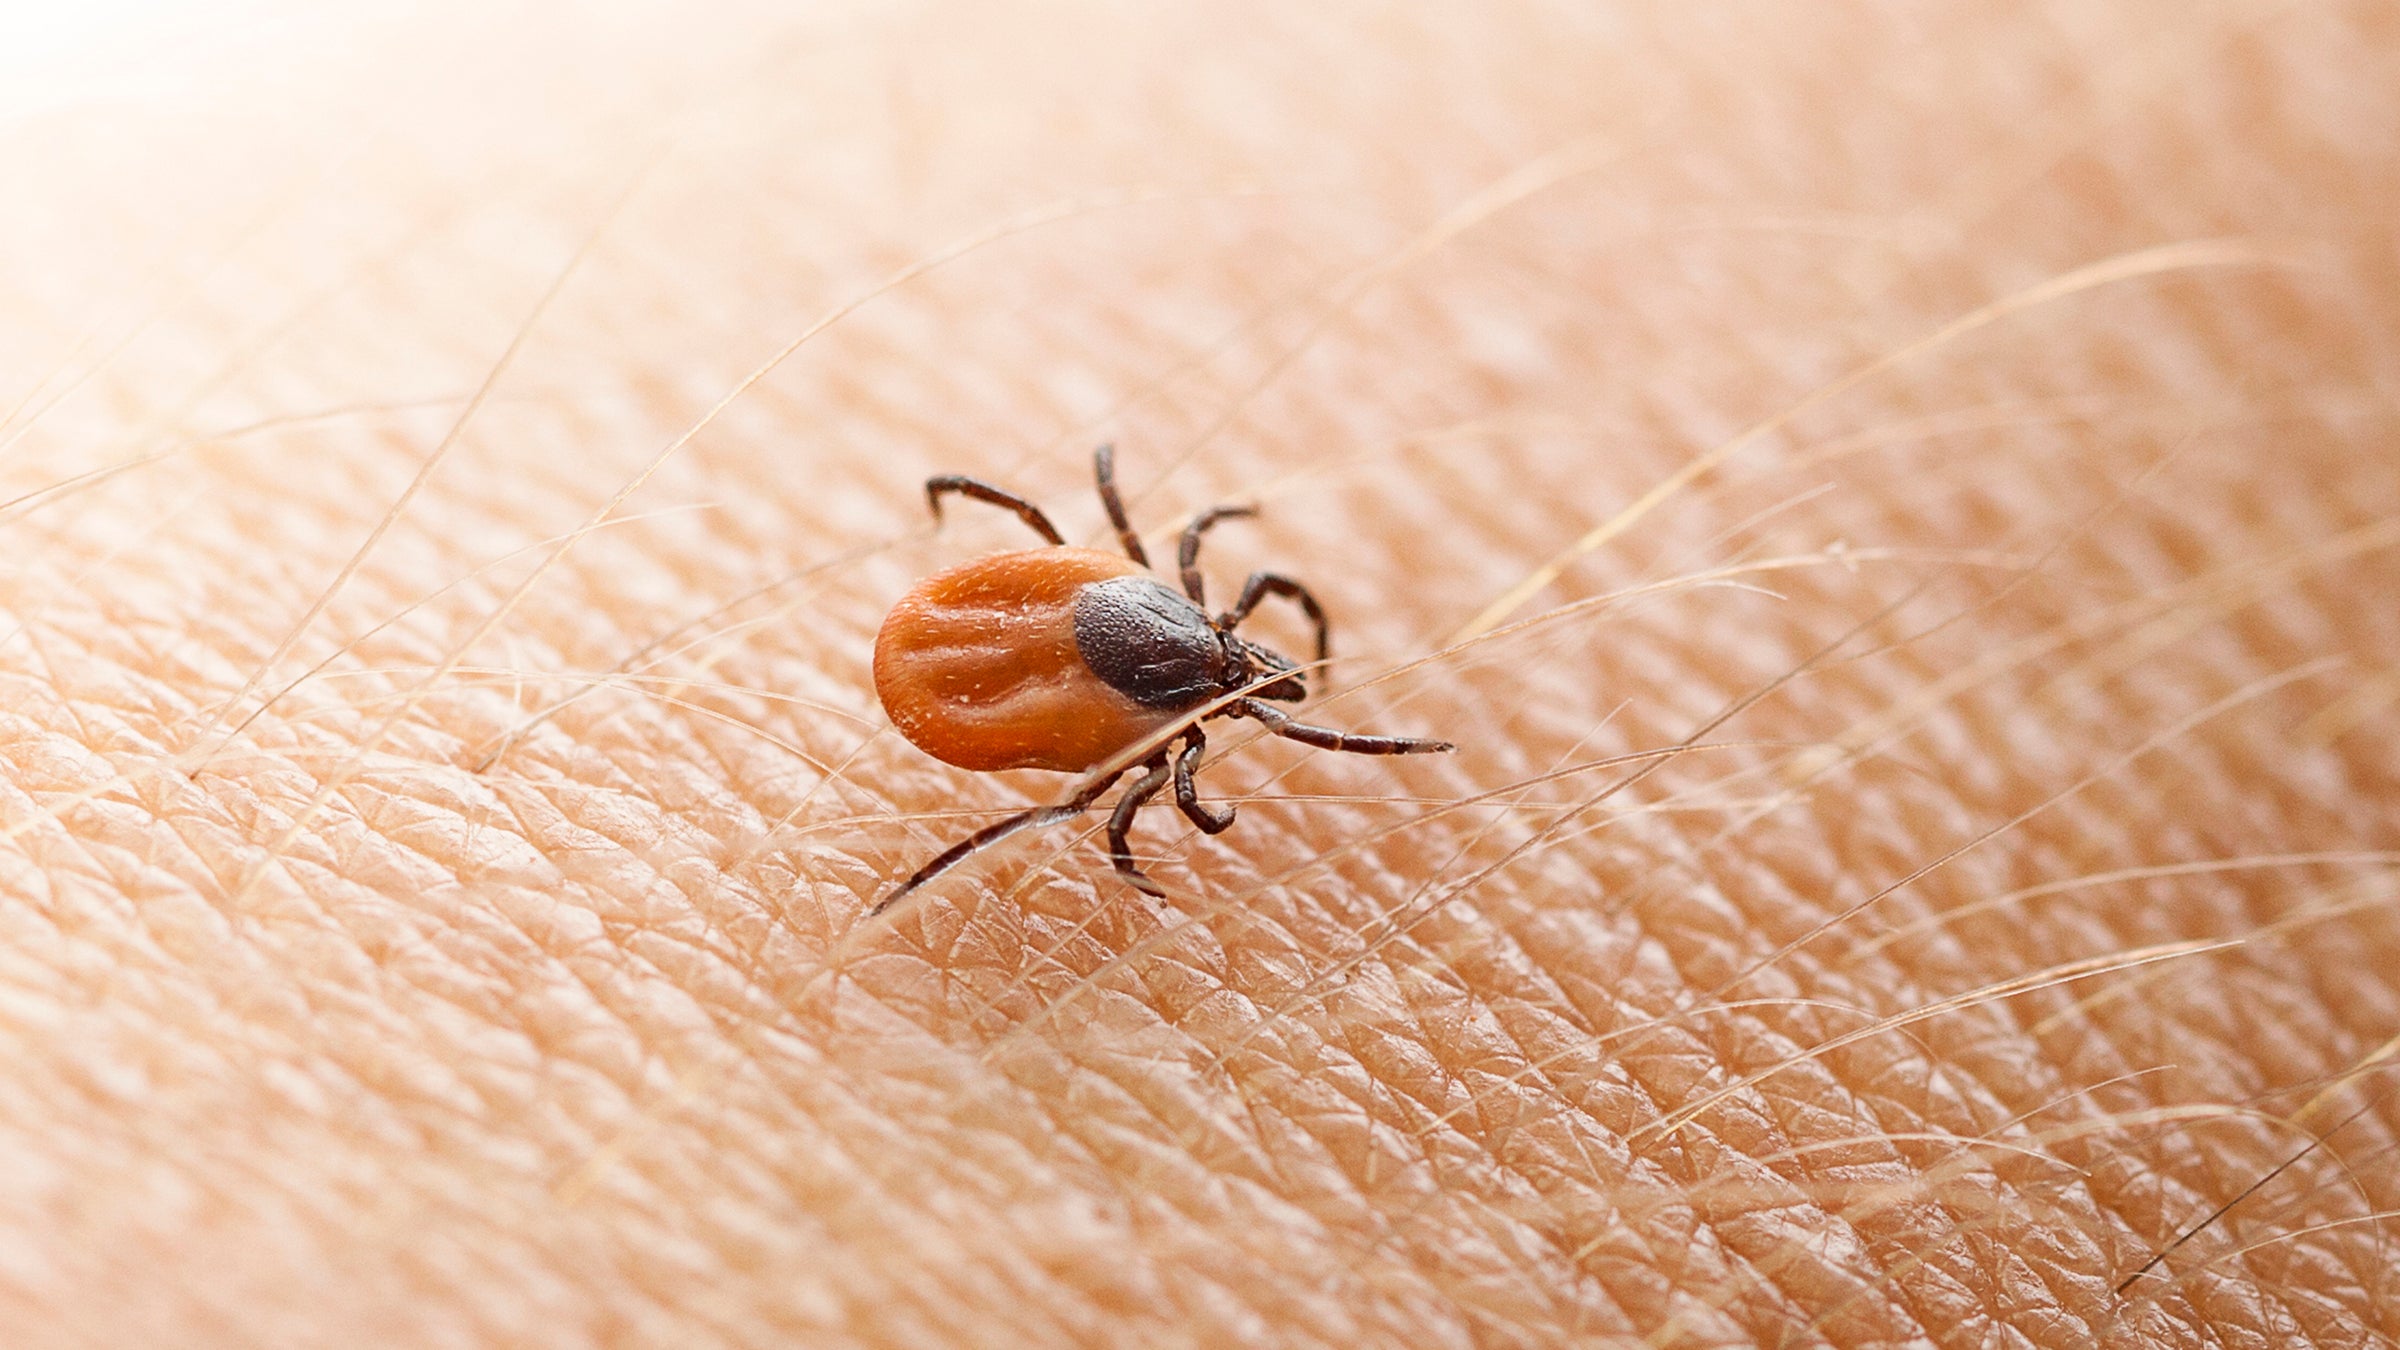 Forest Mite on Dog Hair Tick Stock Image  Image of hand feed 94098595